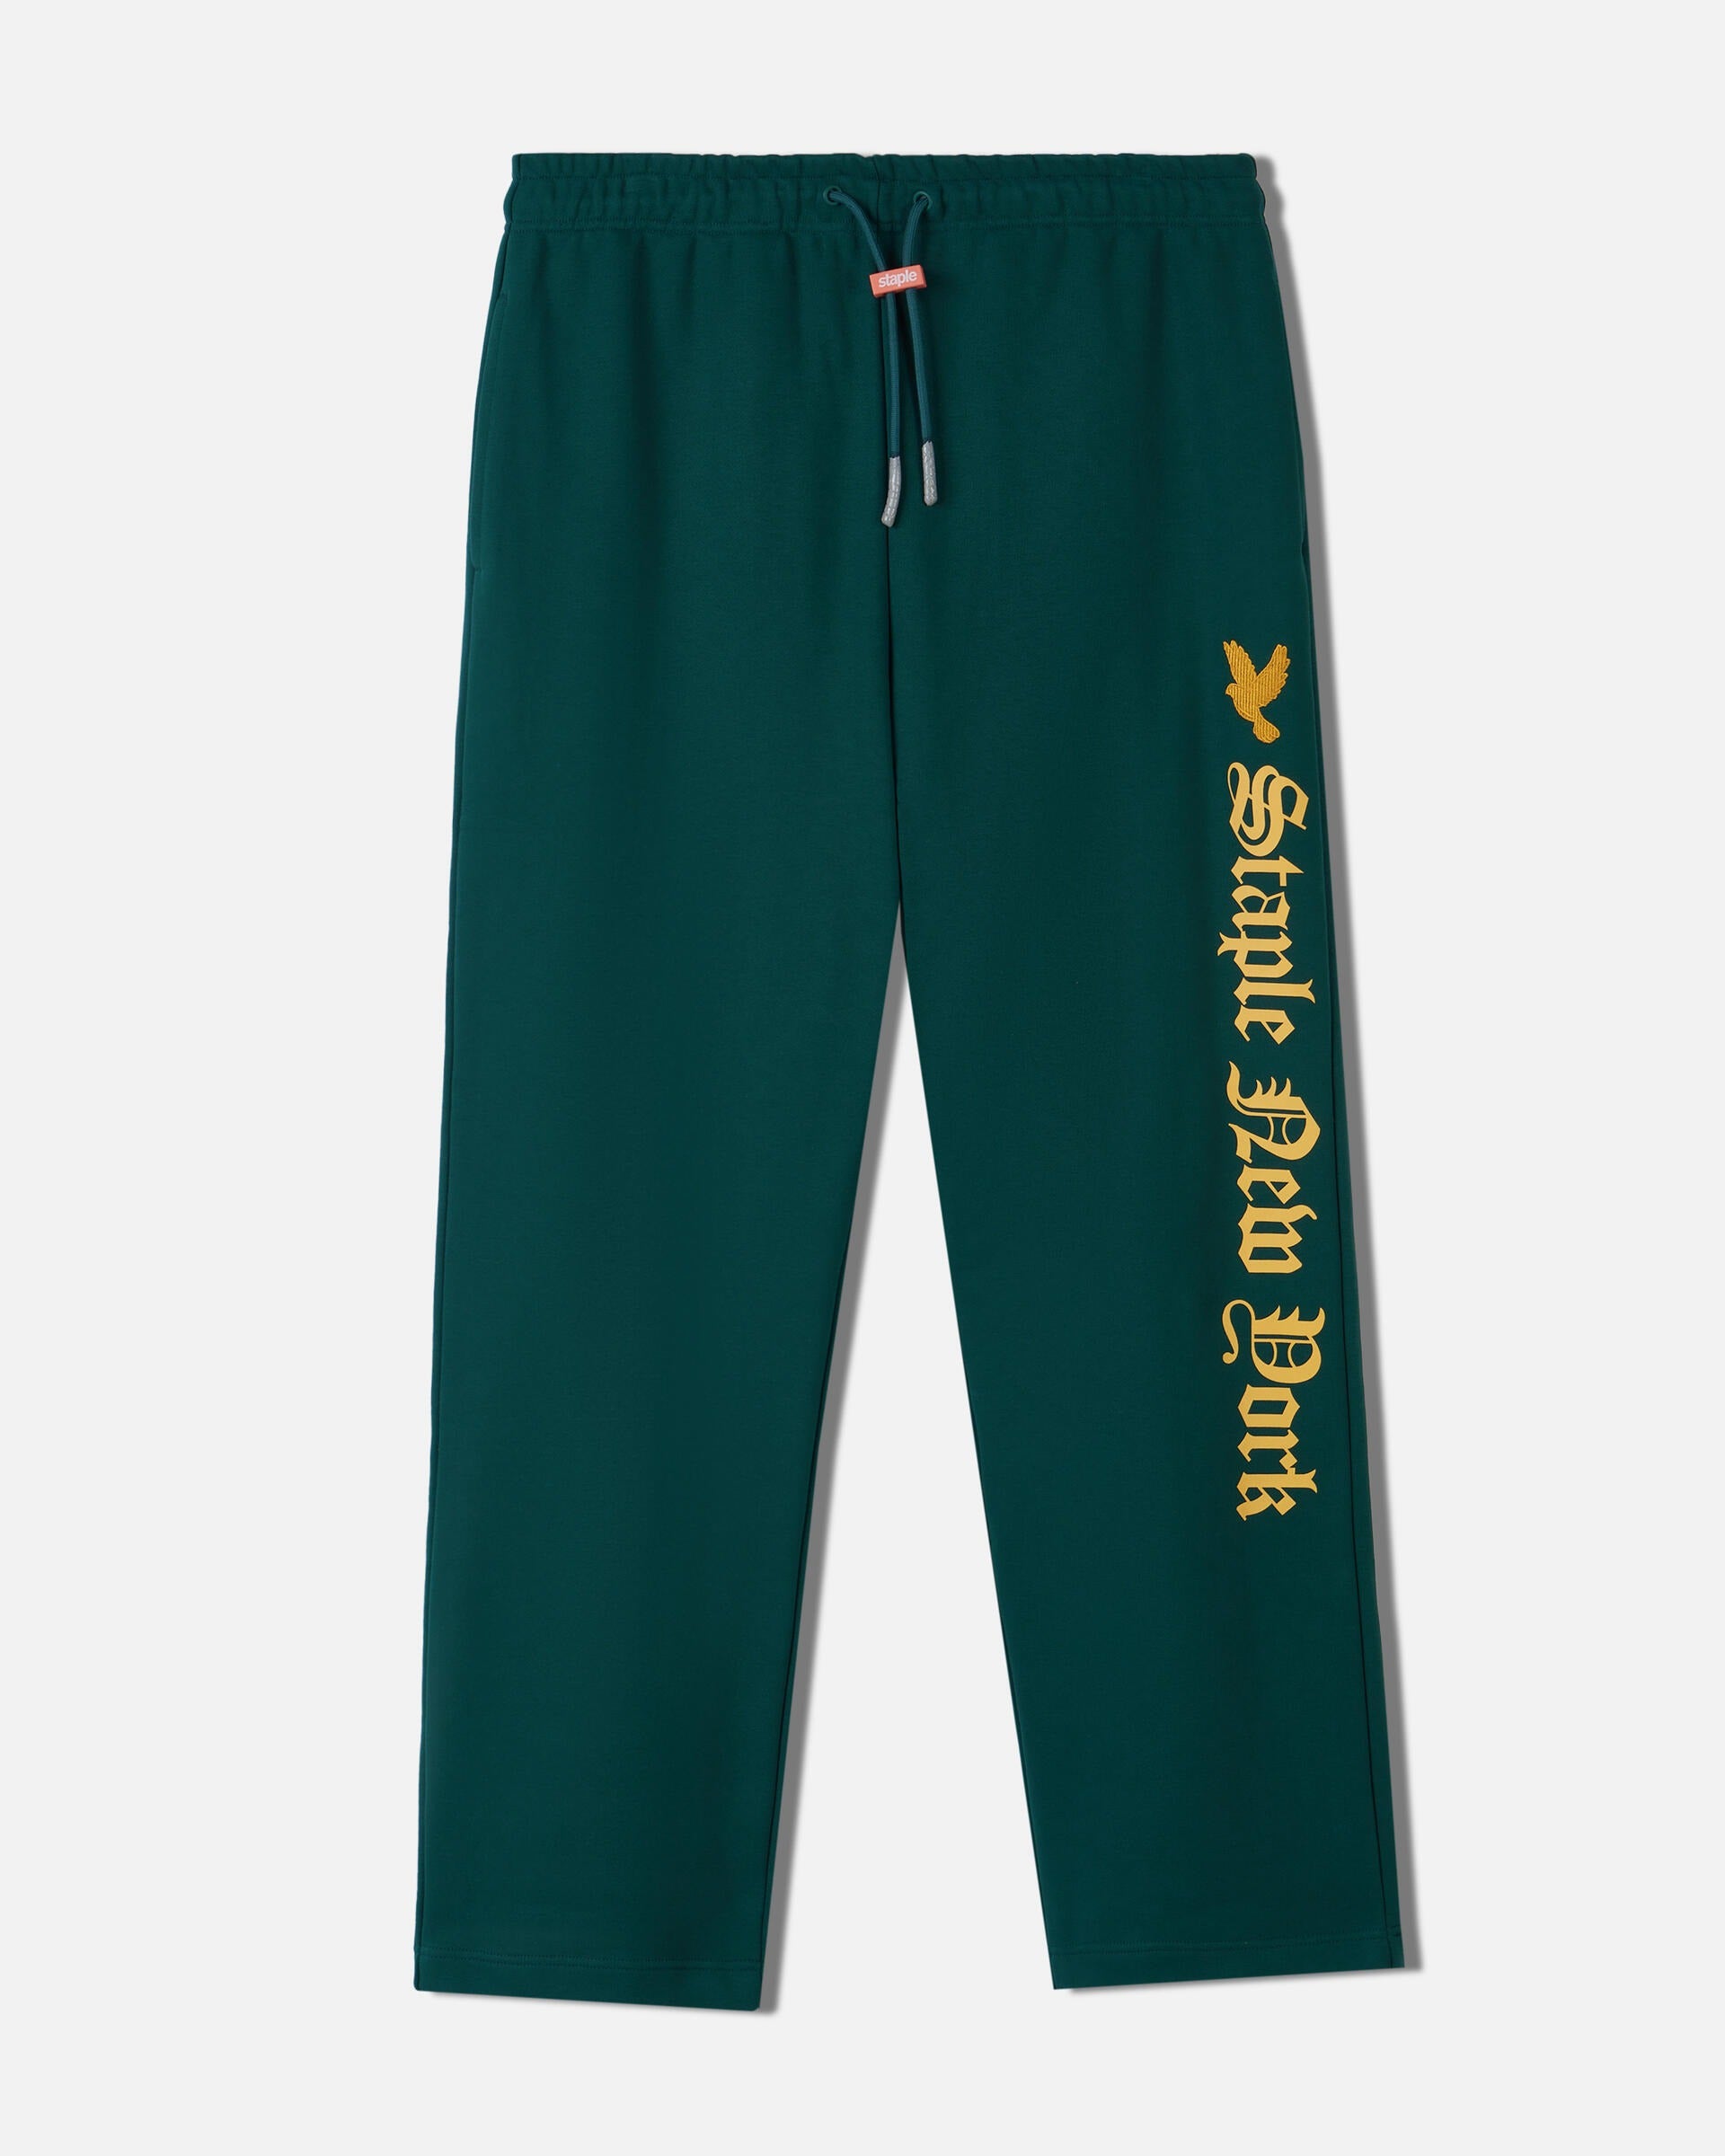 Staple Puma x Staple Washed Sweatpant “Year Of The Dragon”